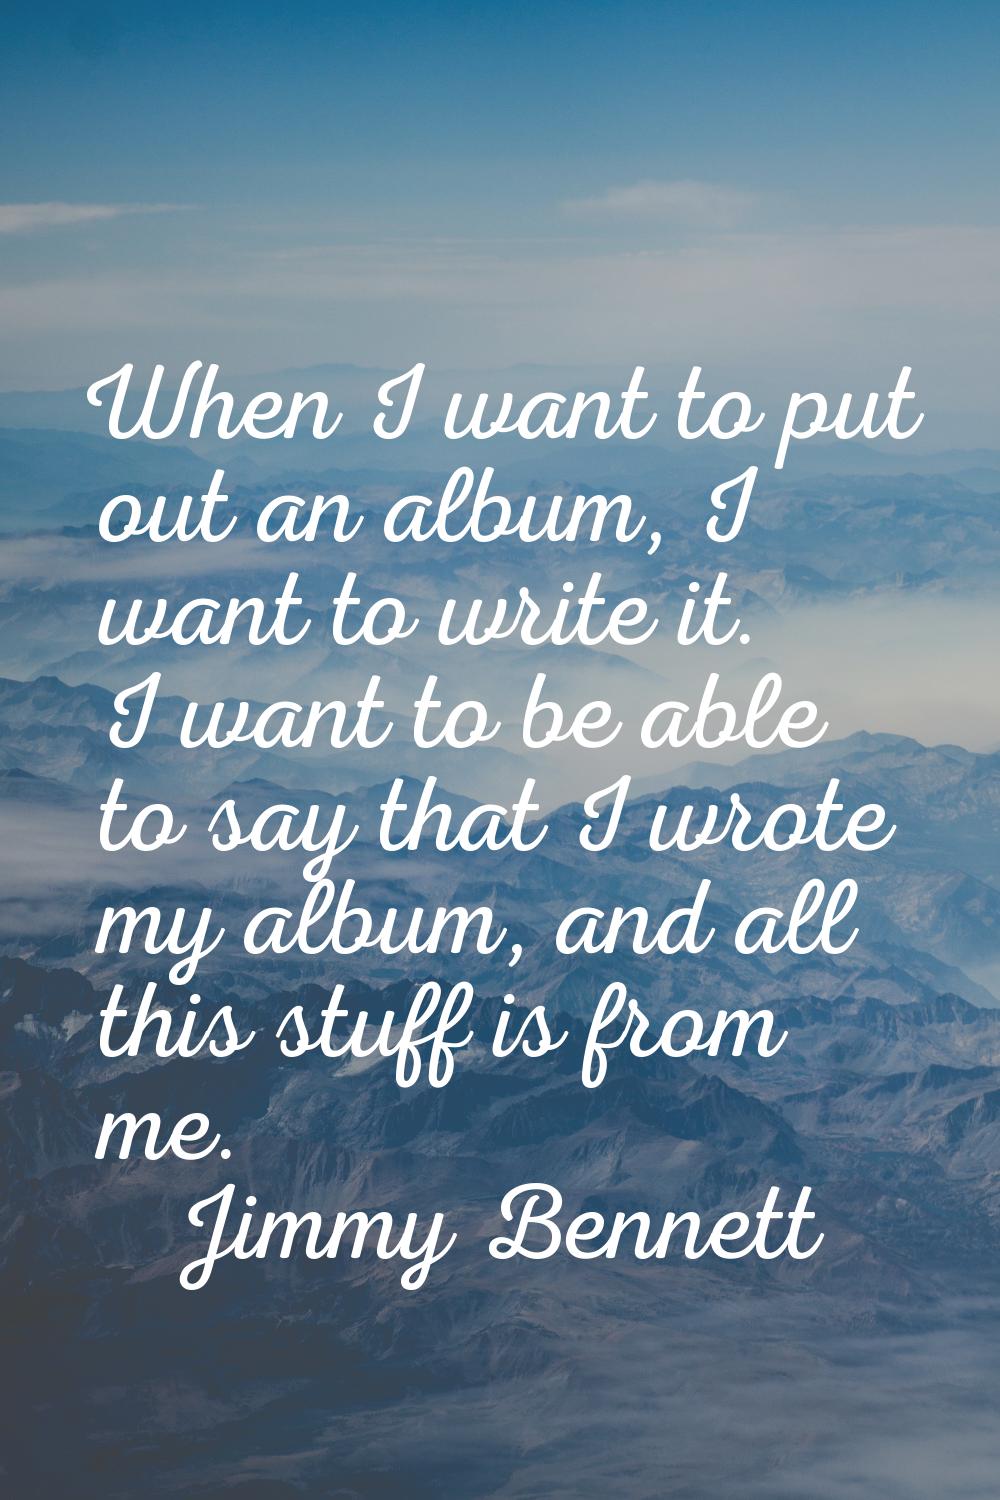 When I want to put out an album, I want to write it. I want to be able to say that I wrote my album